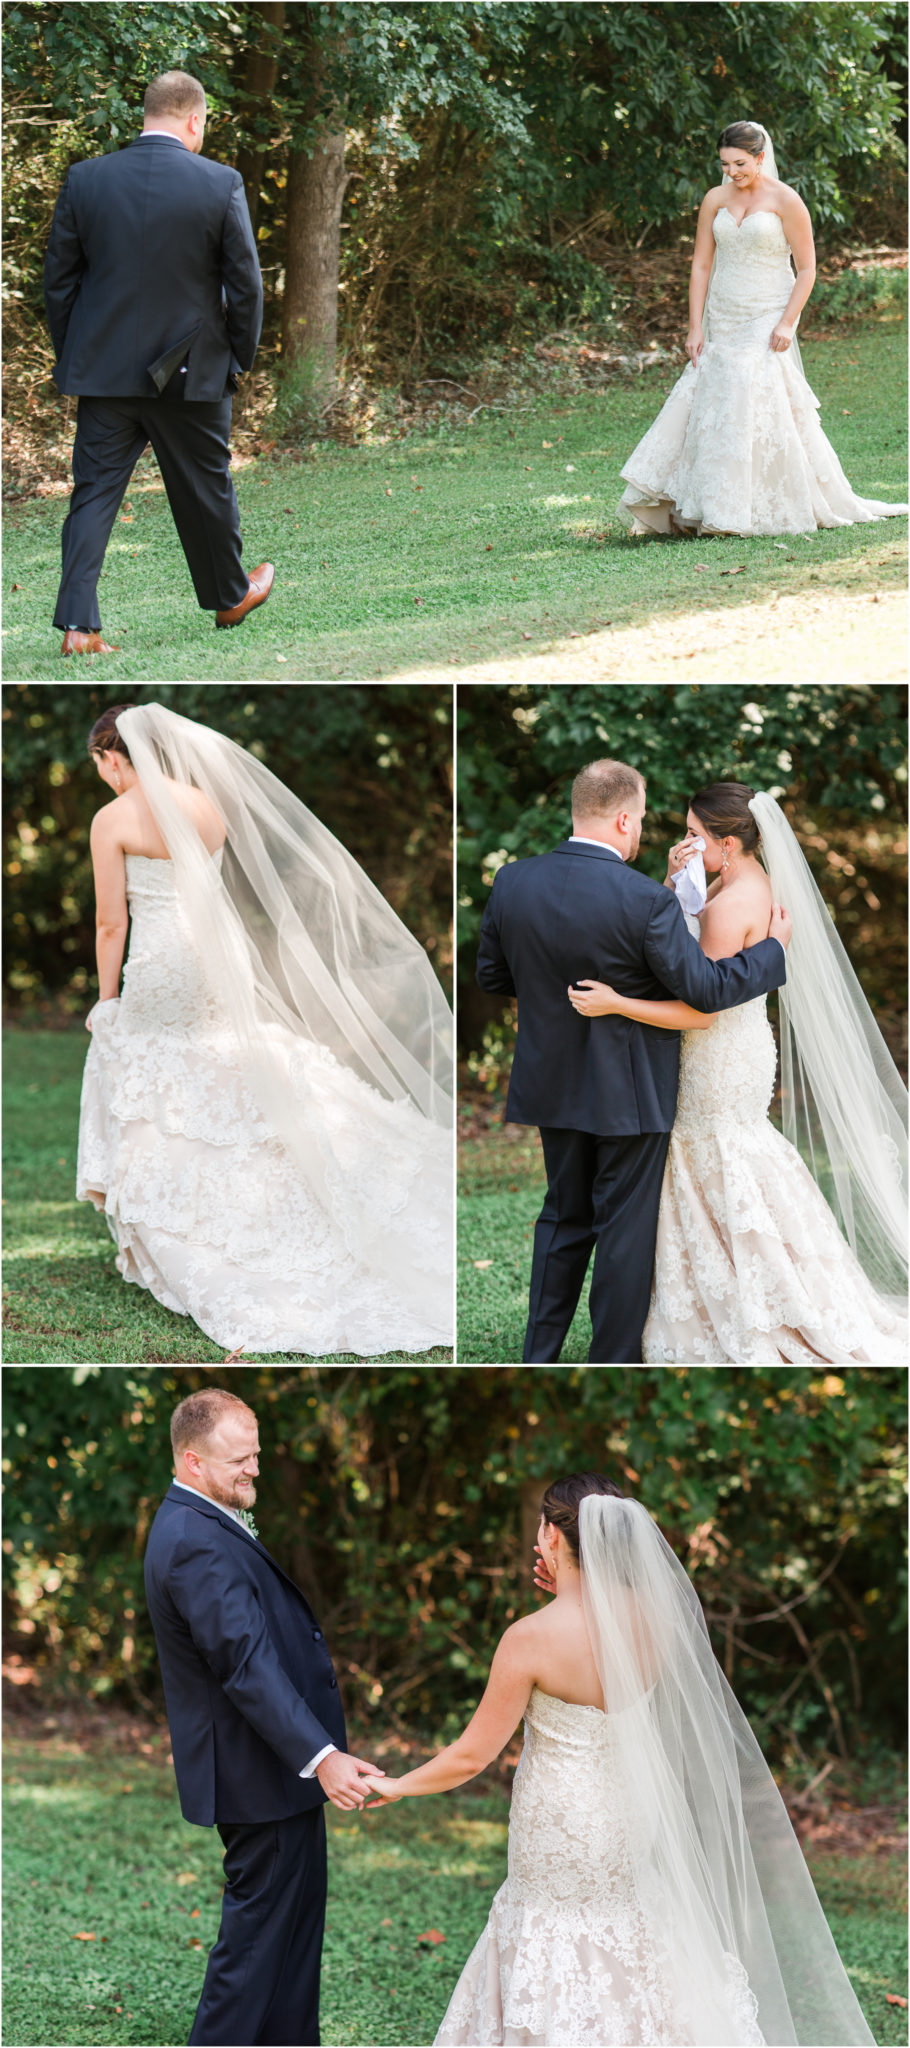 A Fall Vineyard Wedding at Cityscape Winery in Pelzer, SC First Look